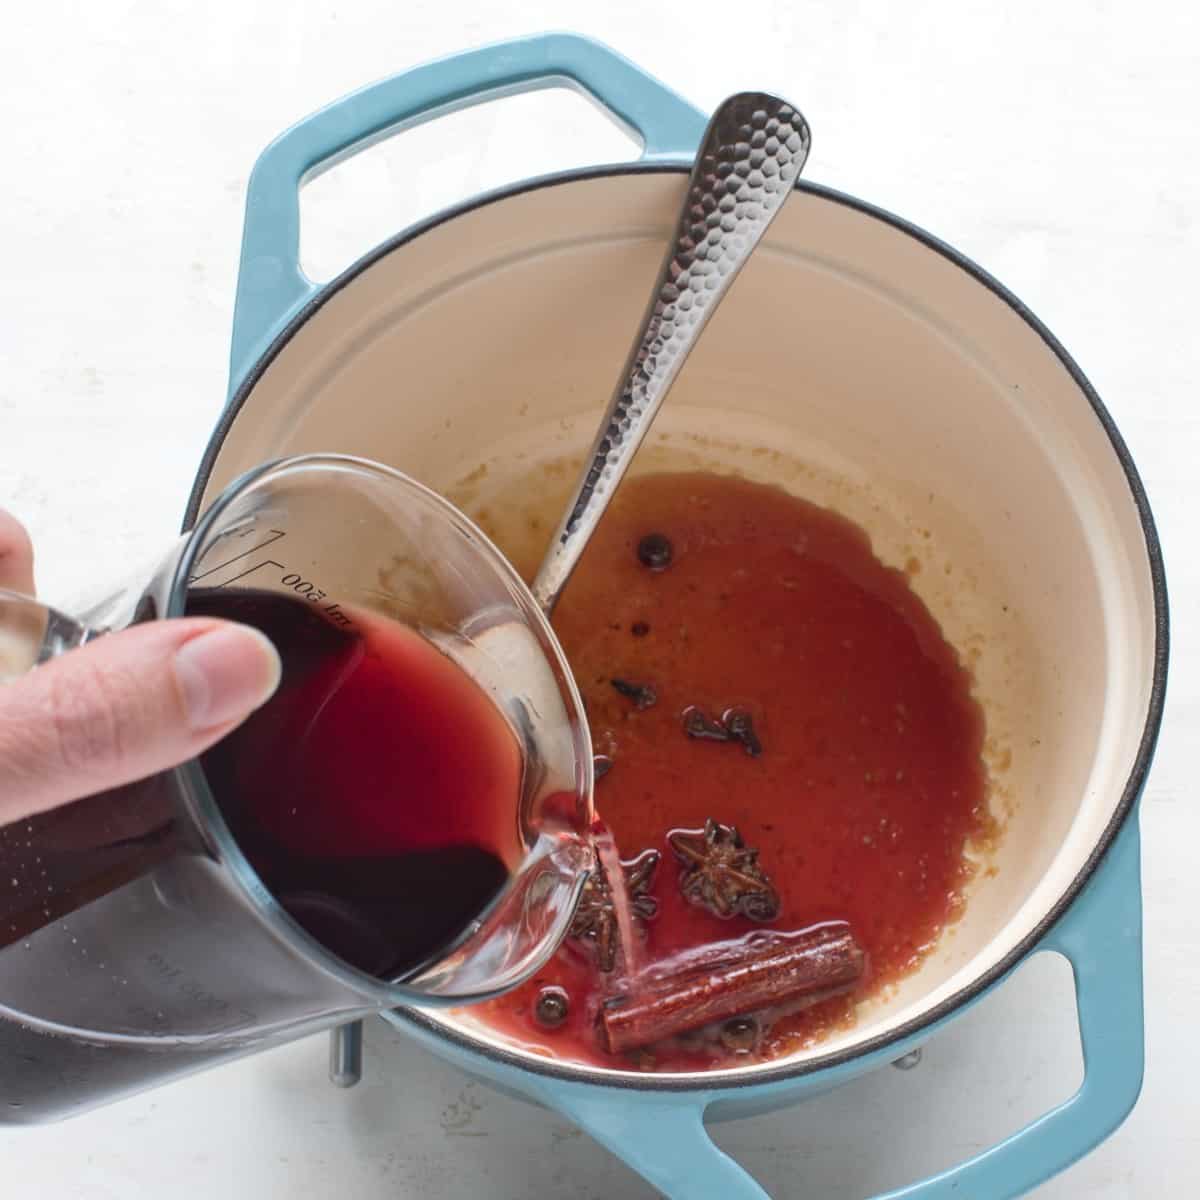 Making spiced wine - pouring red wine to a pot with spices.